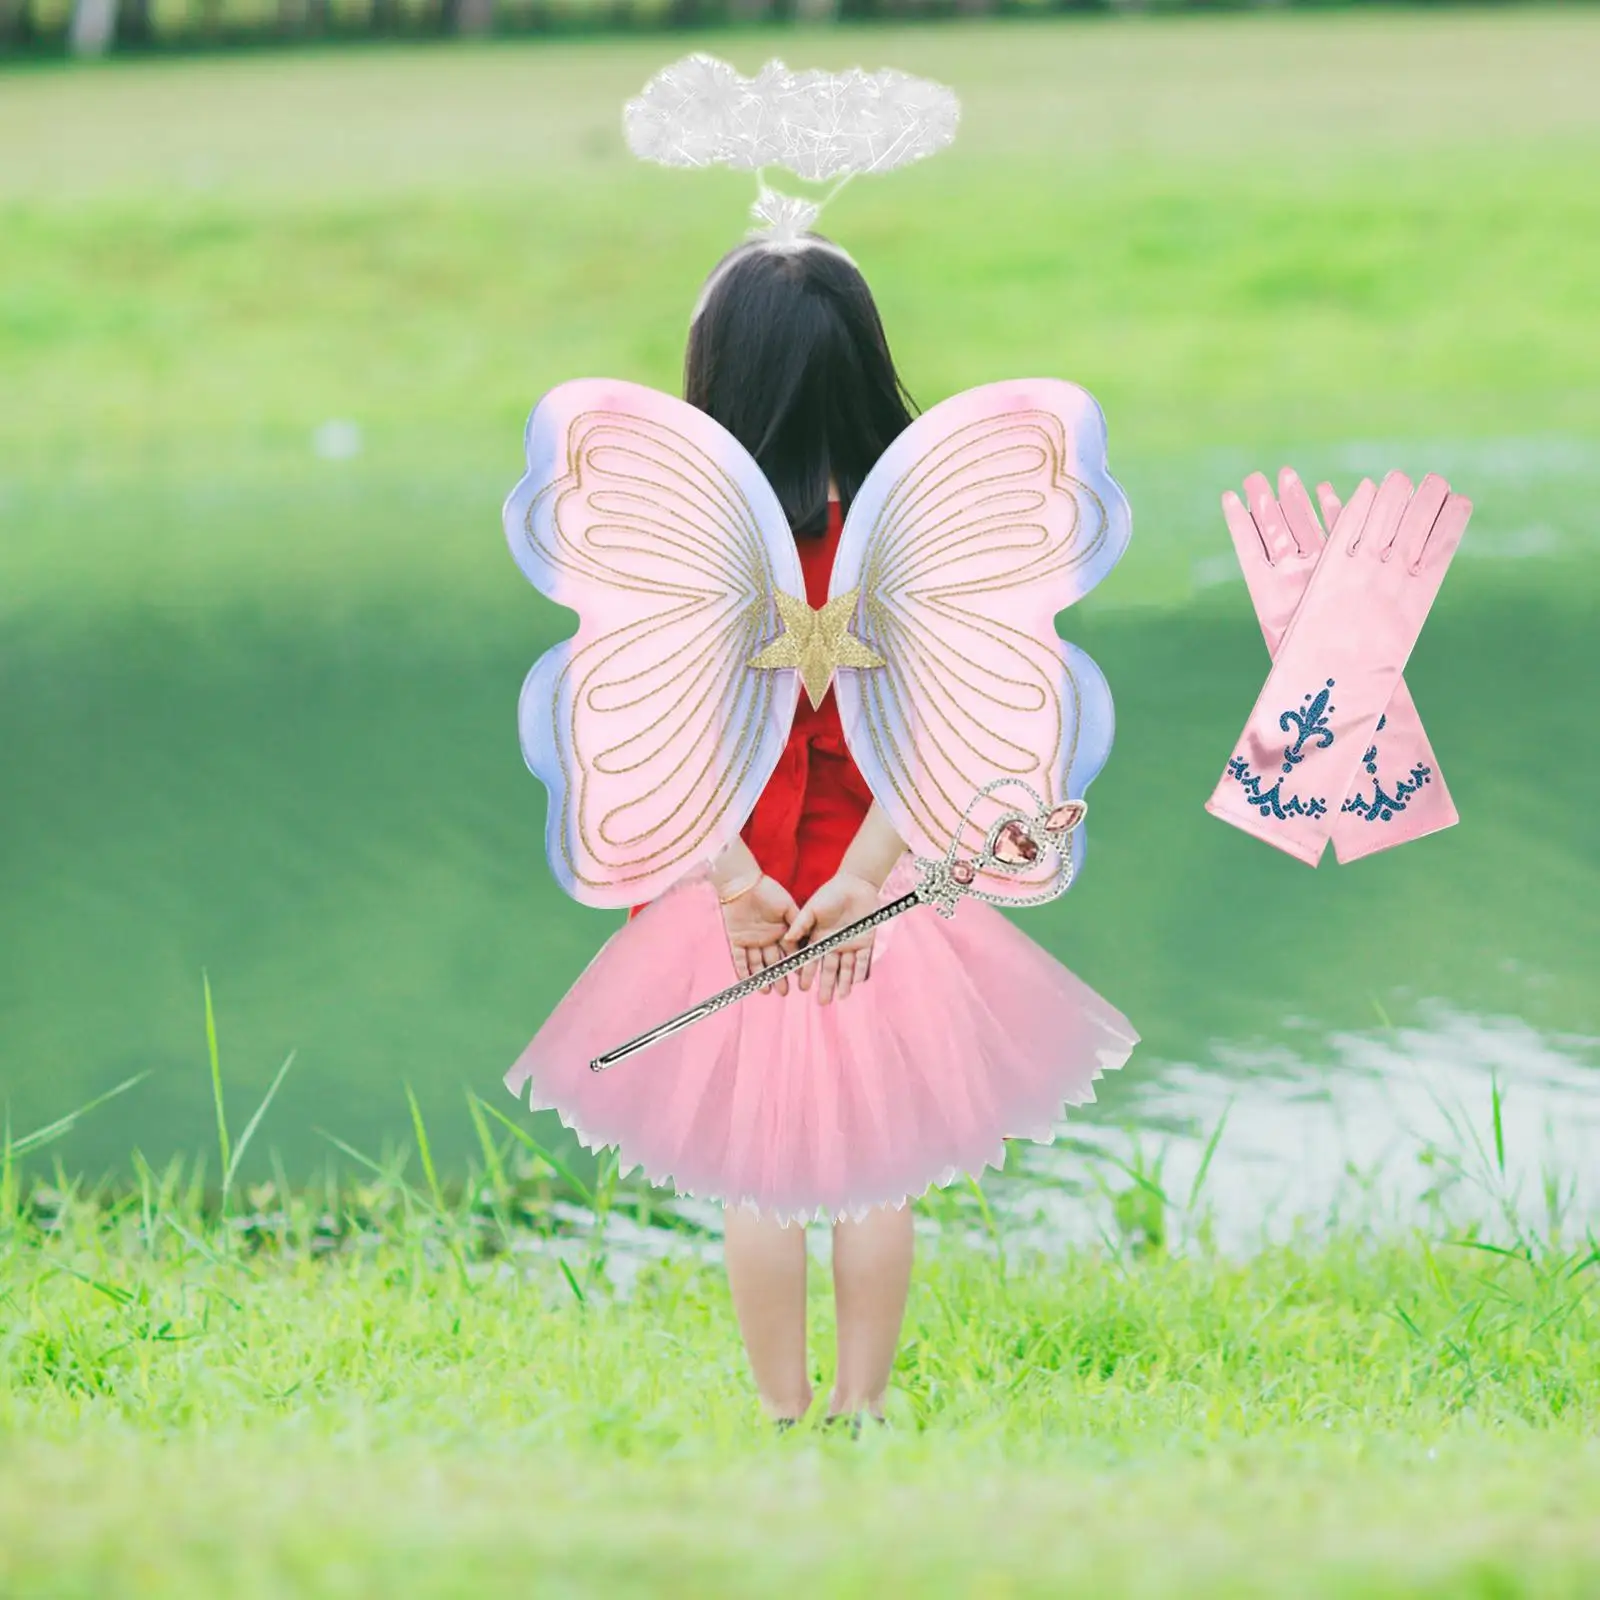 Fairy Butterfly Costume Set Headband Butterfly Wings Wand for Pretended Play Birthday Party Halloween Festival Photo Props